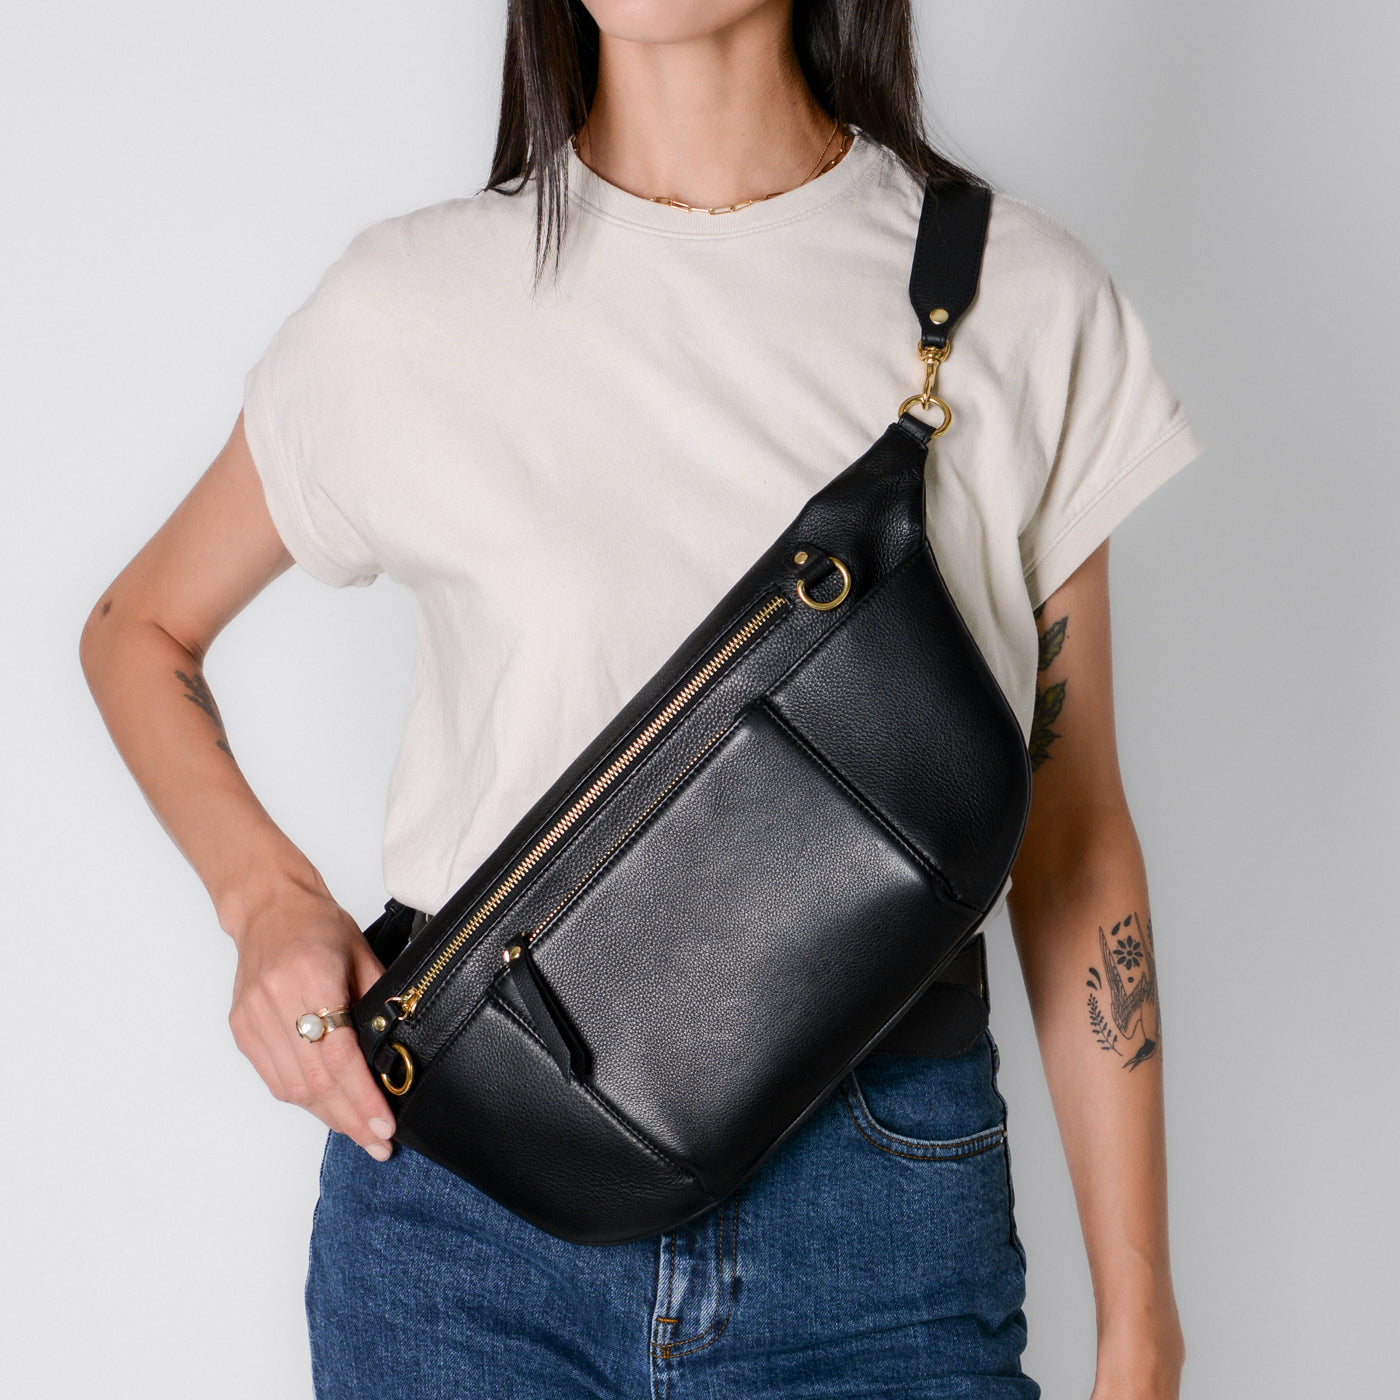 This affordable crossbody bag is a bestseller on